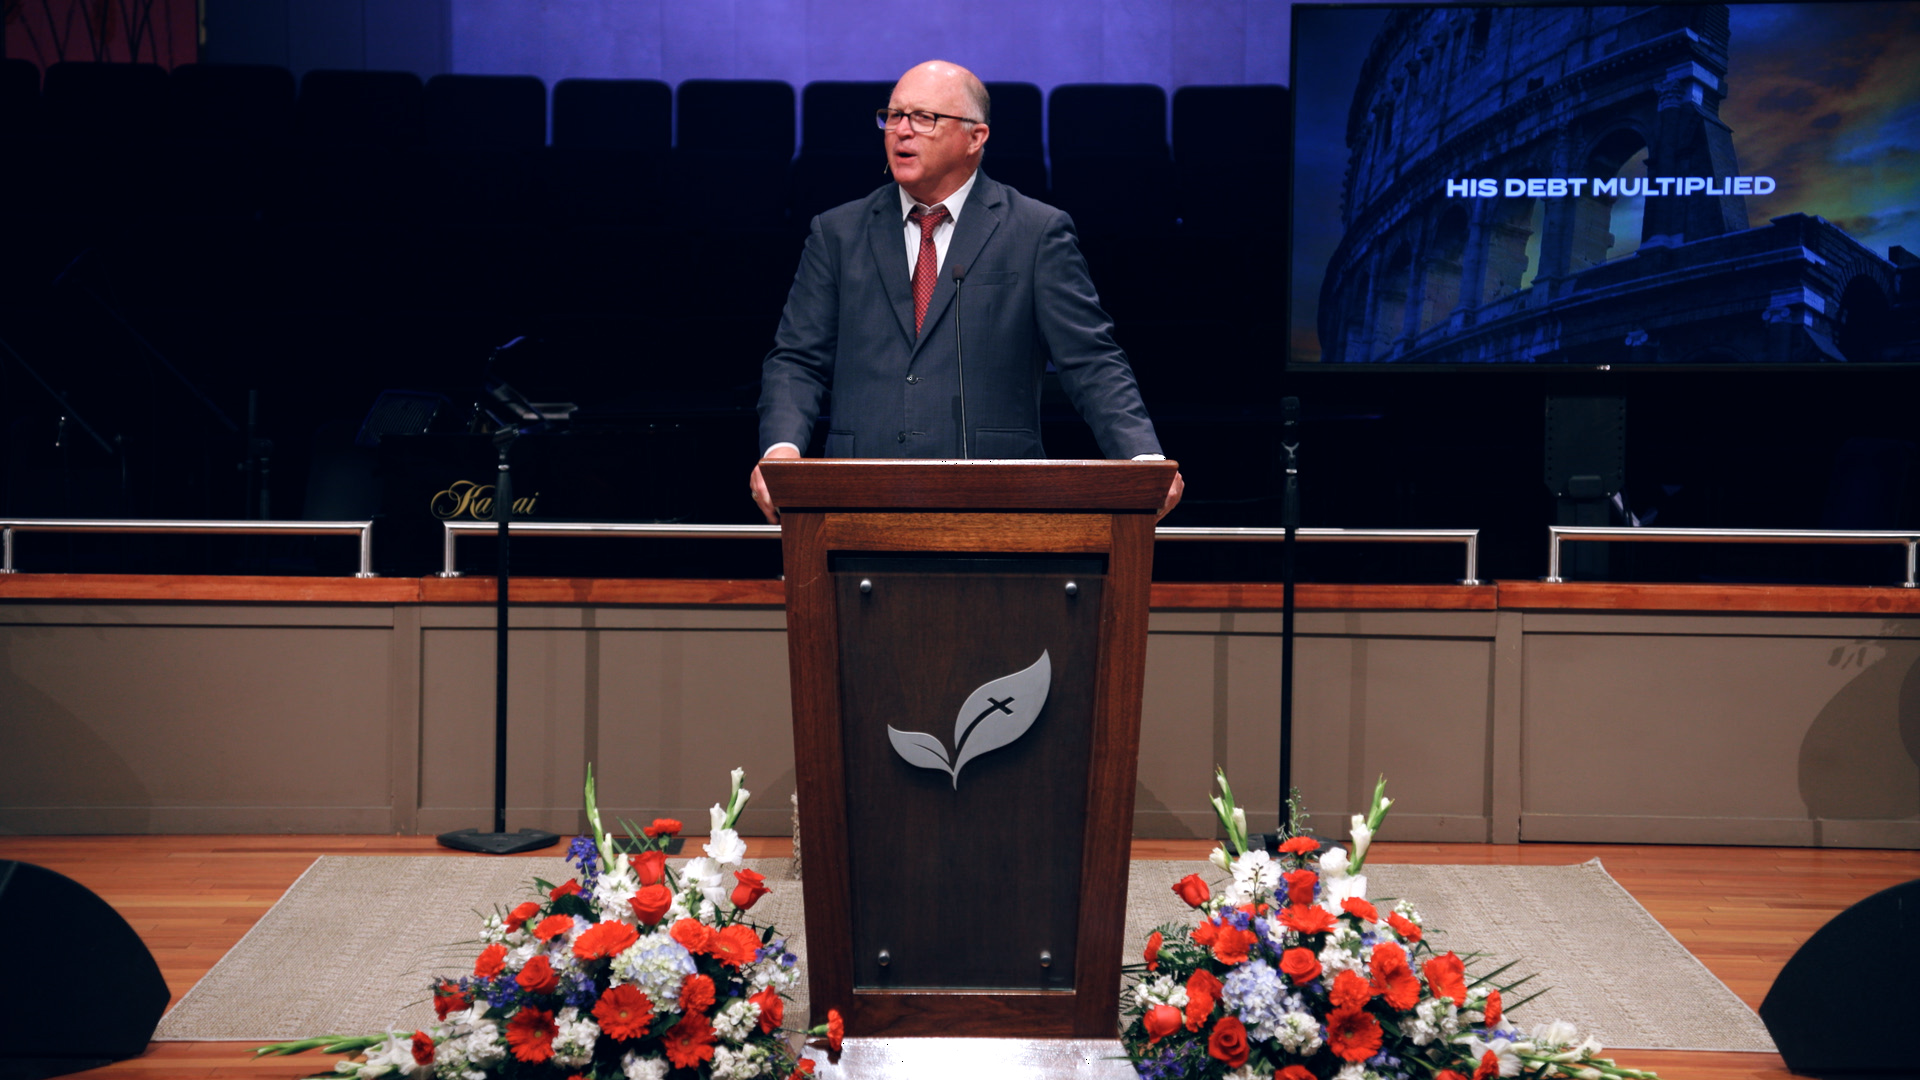 Pastor Paul Chappell: Ready to Preach